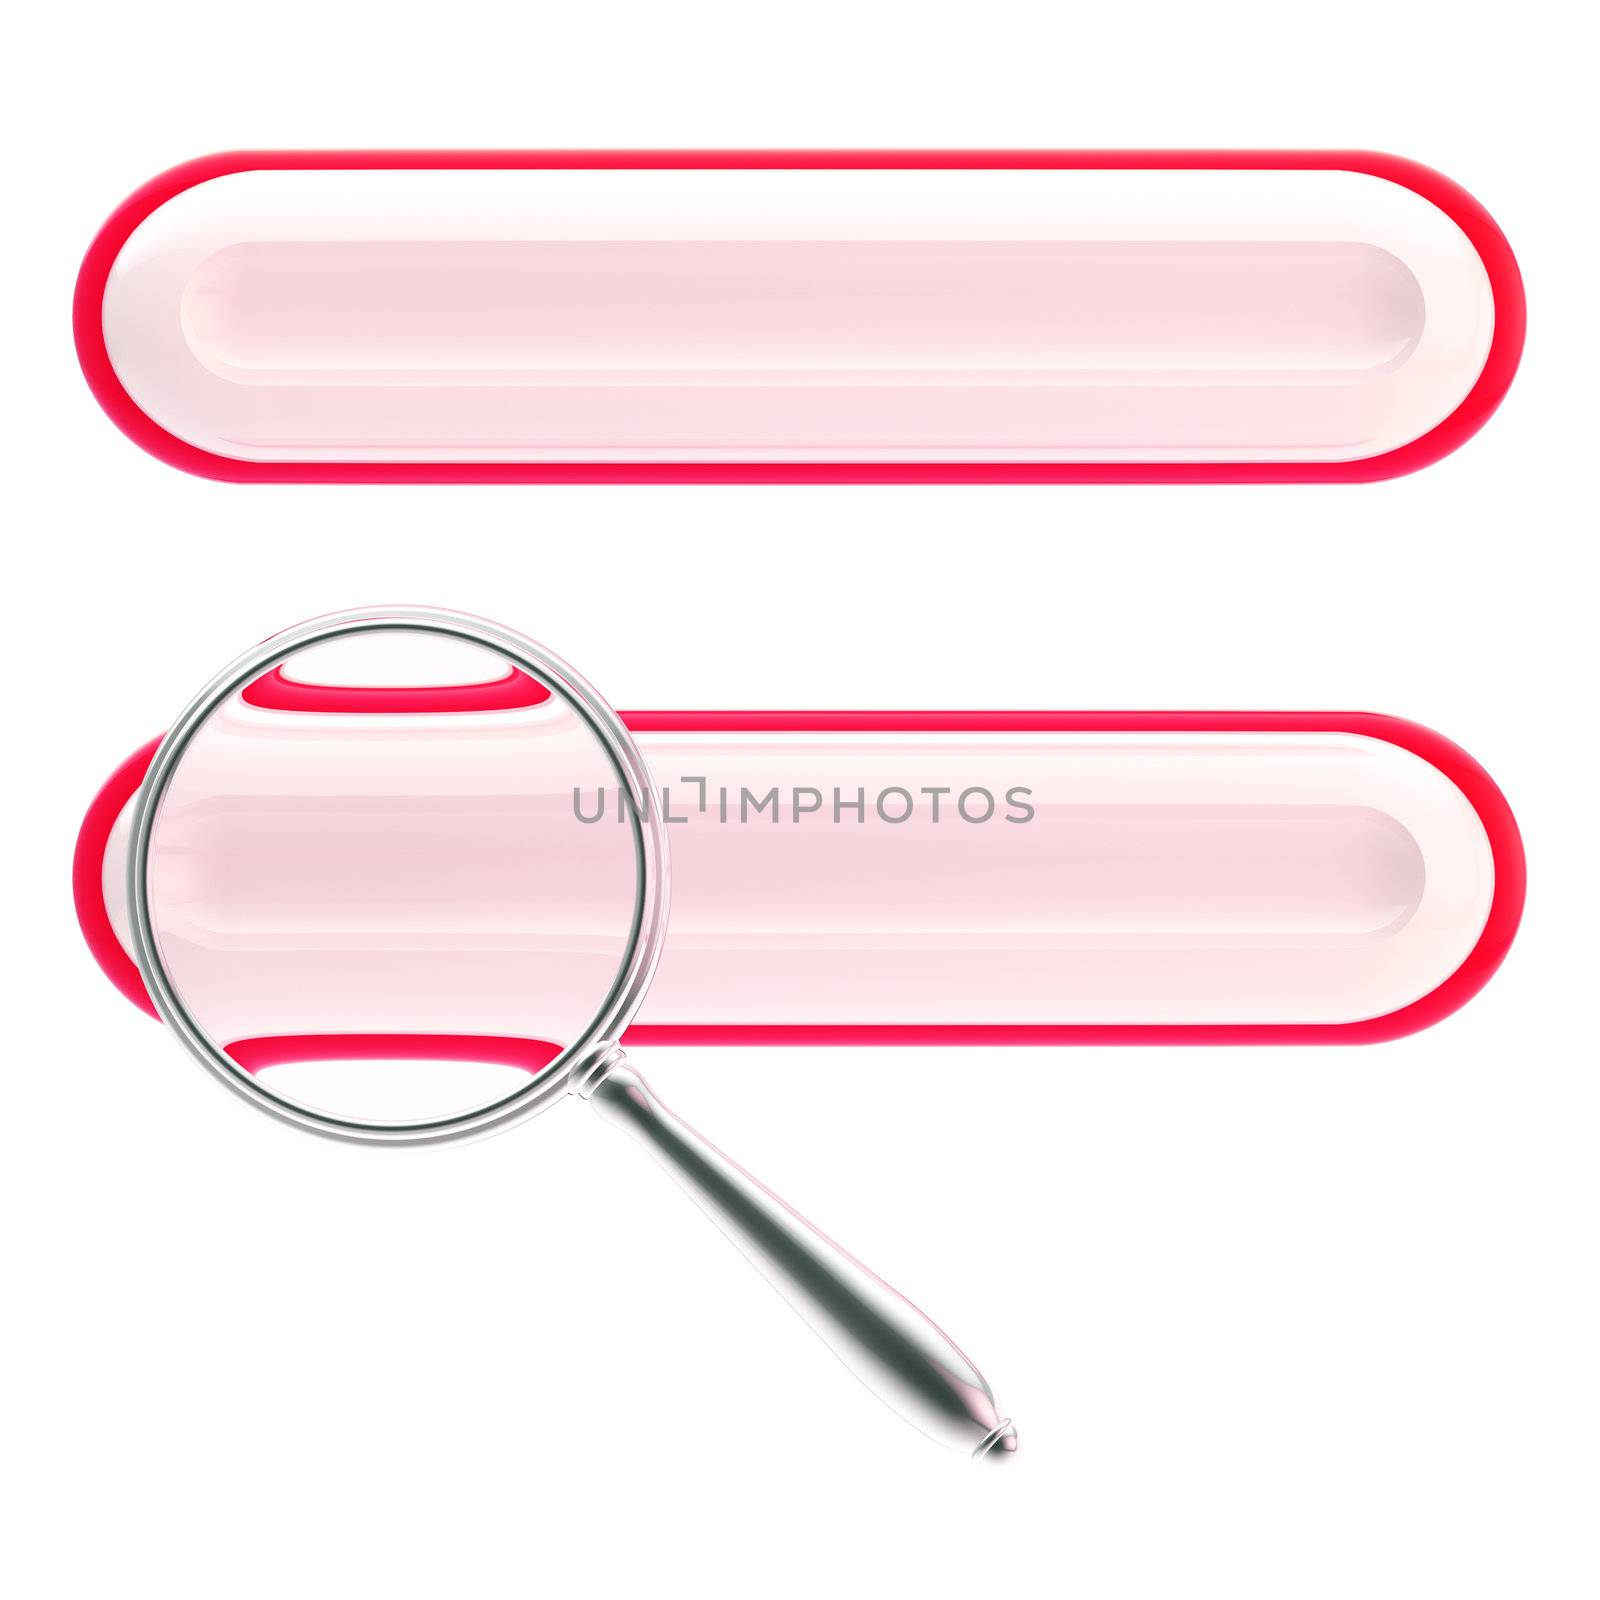 Search bar under the magnifier icon isolated by nbvf